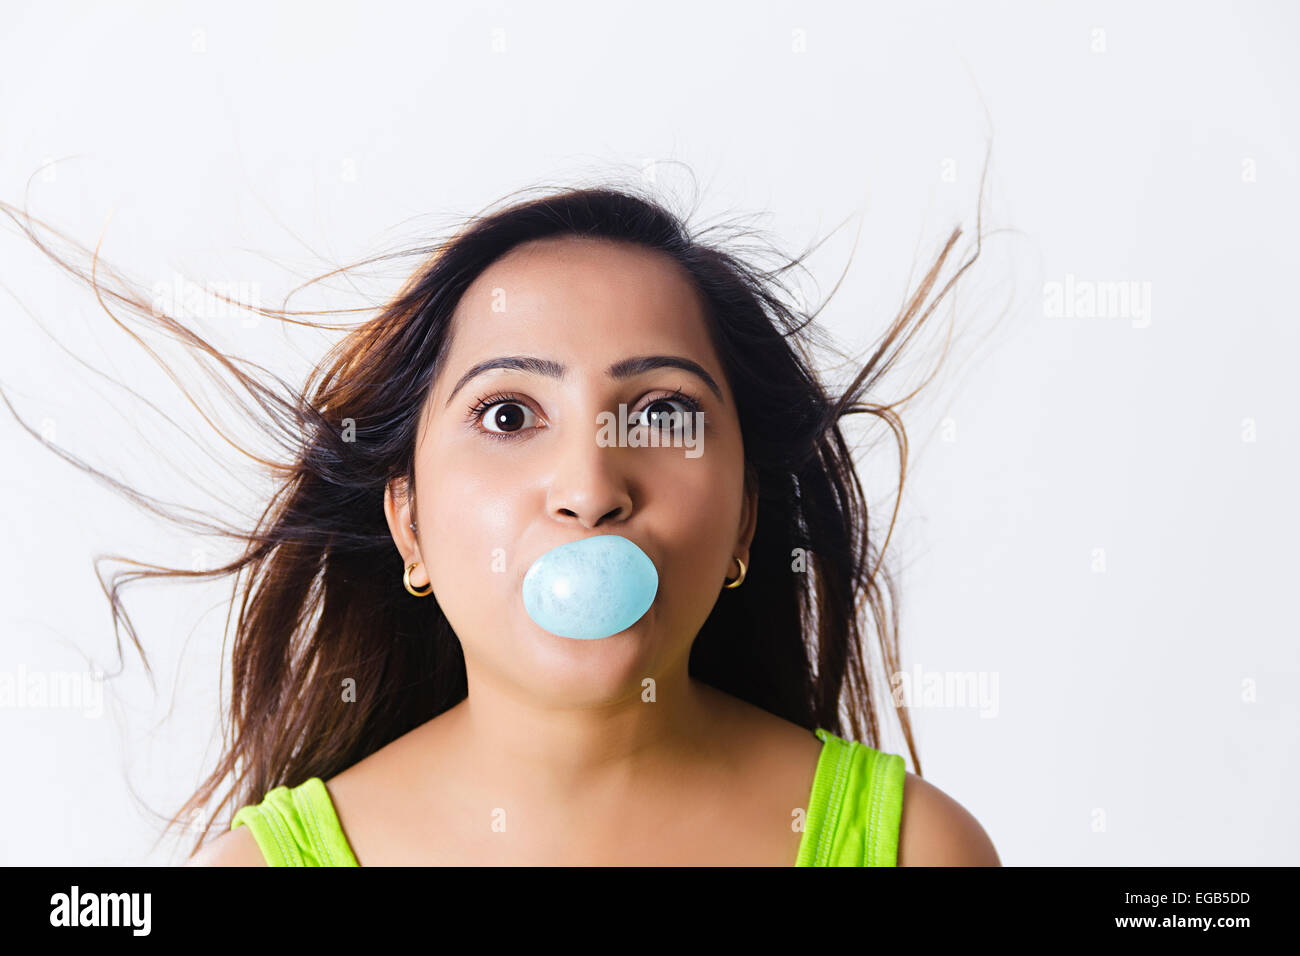 1 indian Girl Blowing  Bubble Gum Stock Photo